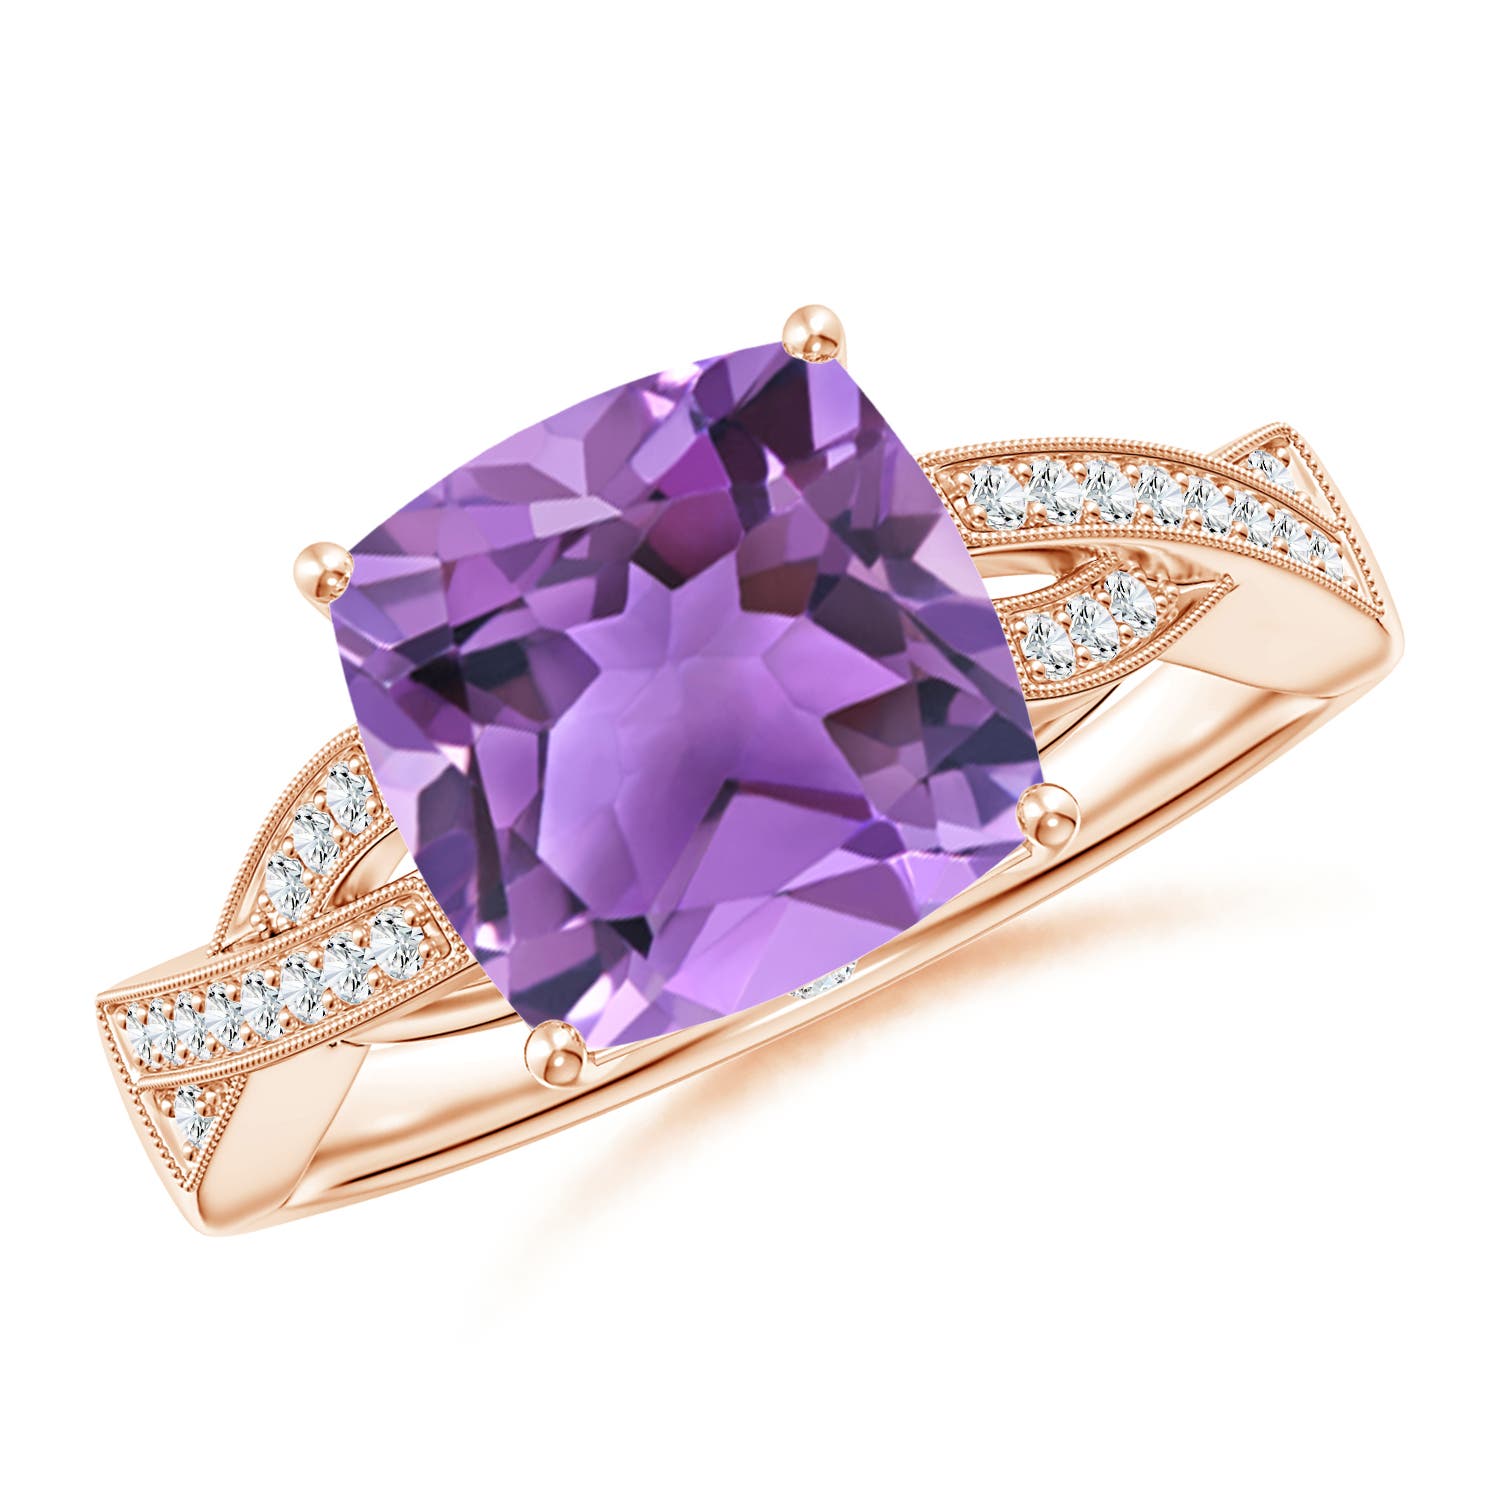 AA - Amethyst / 3.24 CT / 14 KT Rose Gold